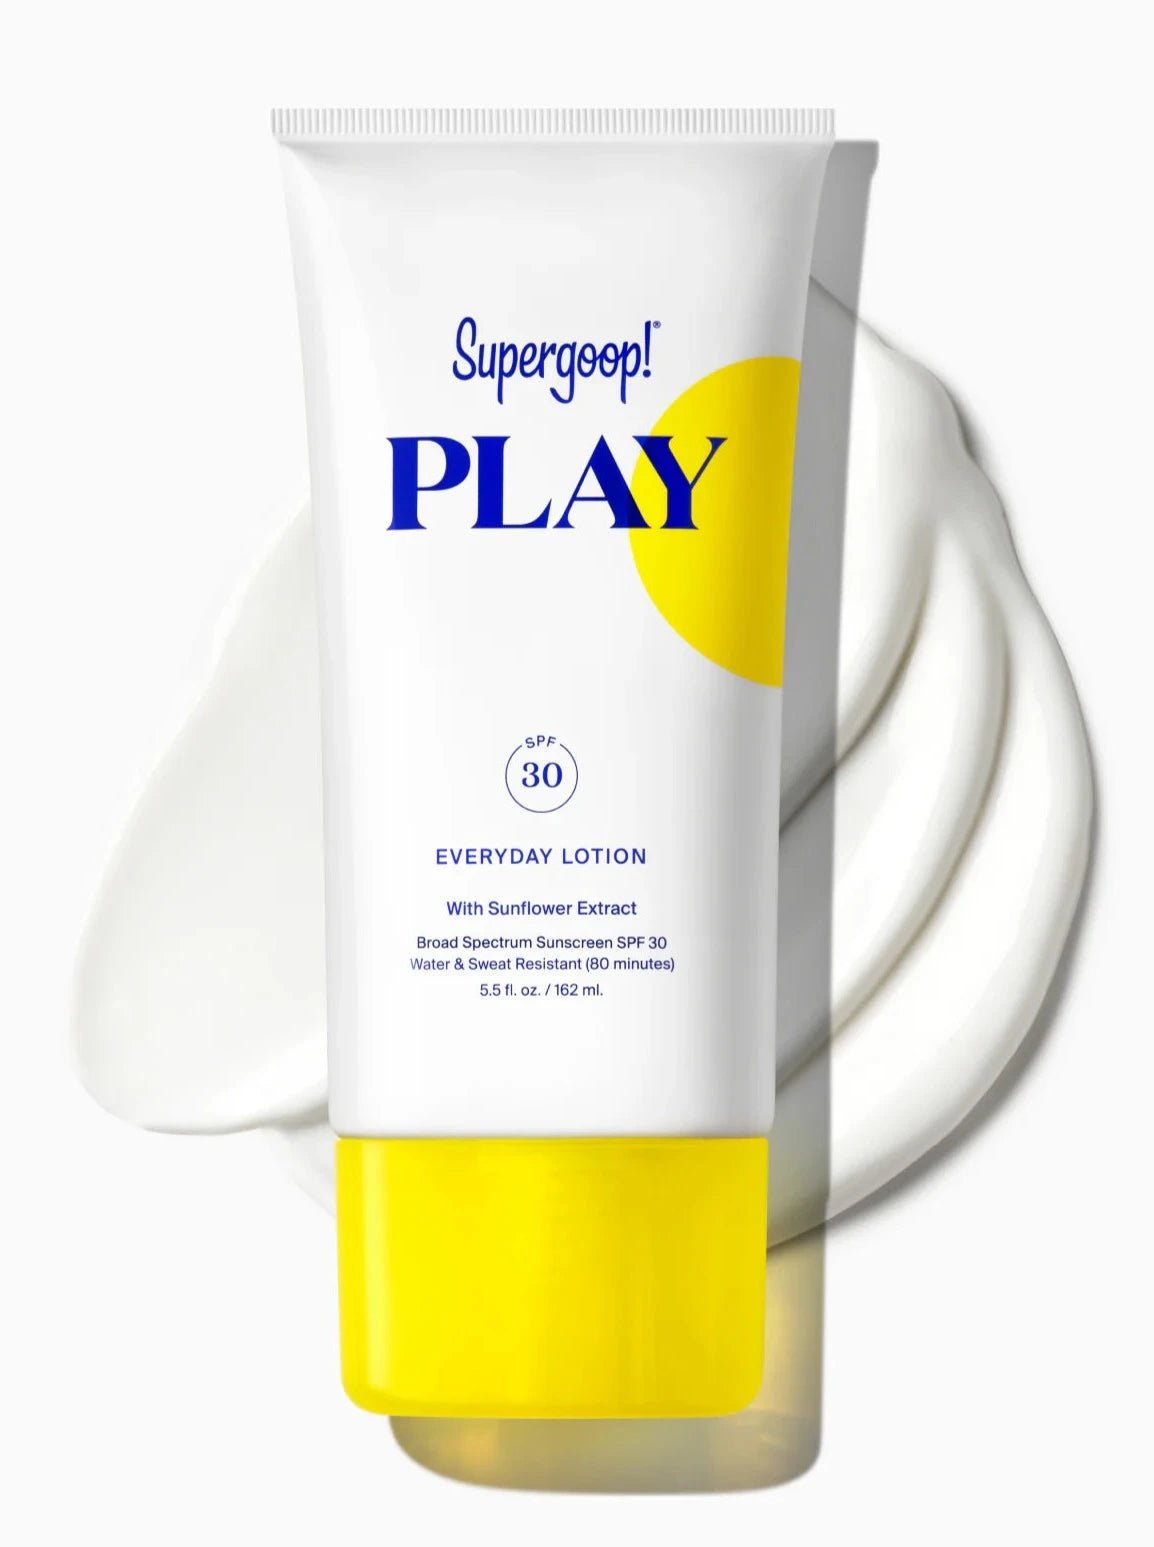 Supergoop! PLAY Everyday Lotion SPF 30 - 30A Gear - novelty misc